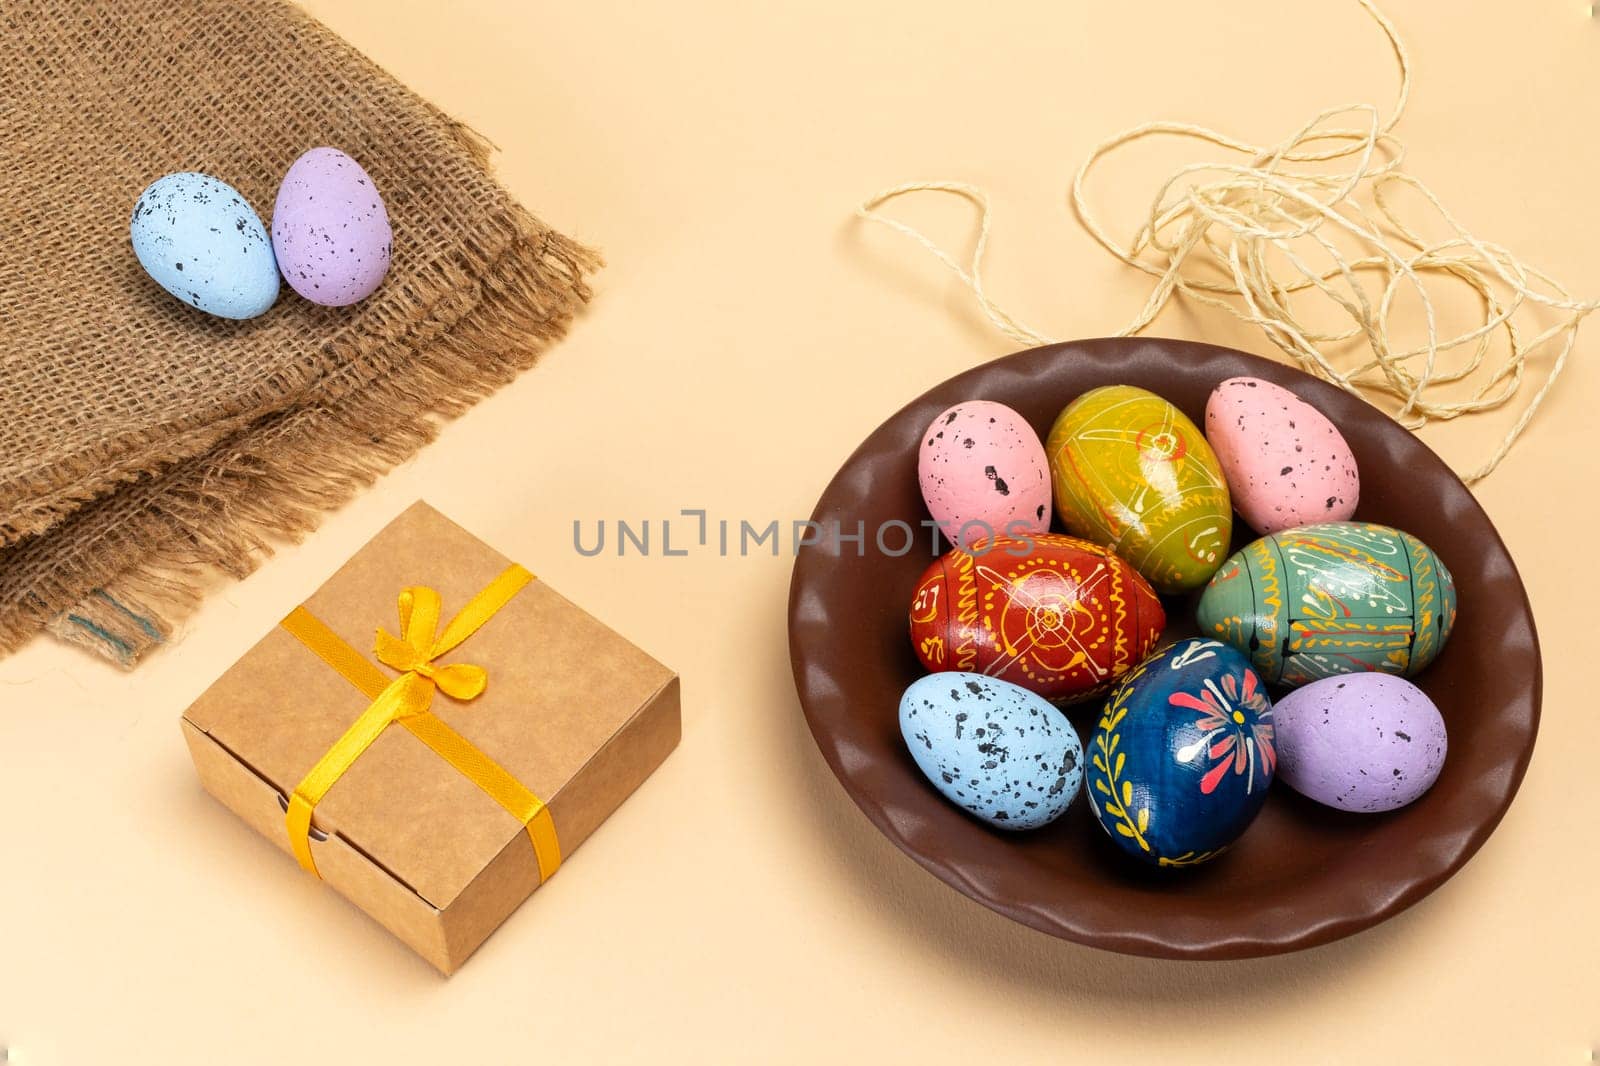 Plate with colored Easter eggs and a gift box. by mvg6894